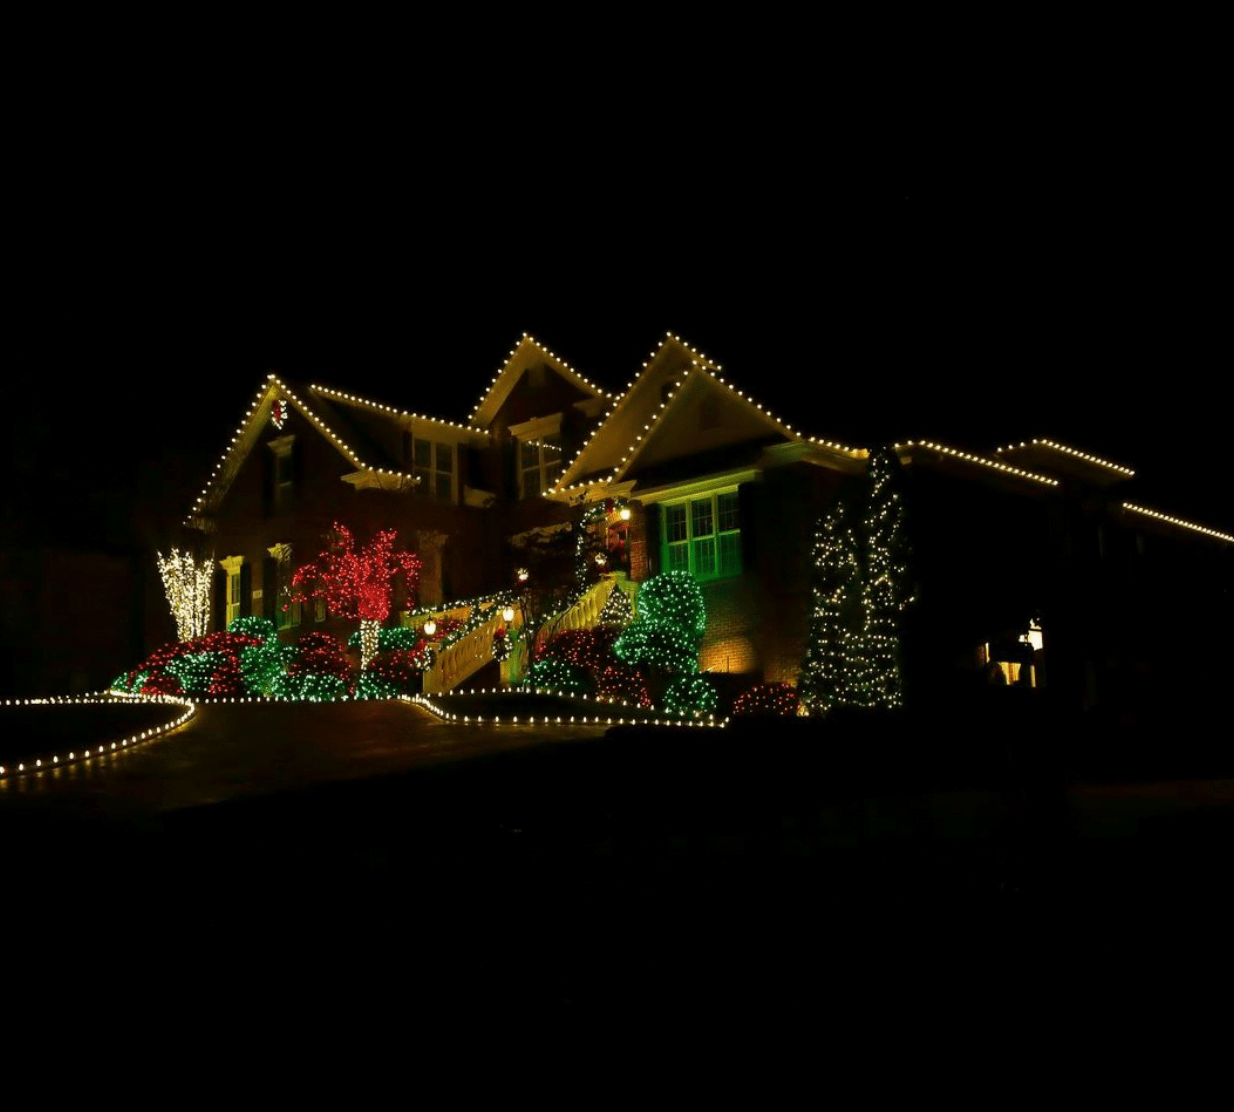 Professional Christmas Lights in Madison: Holiday Lighting Solutions offers interior and exterior Christmas and Halloween lights and decor. They provide all lights and decor and will tackle both set-up and tear-down, meaning you do not have to lift a finger.